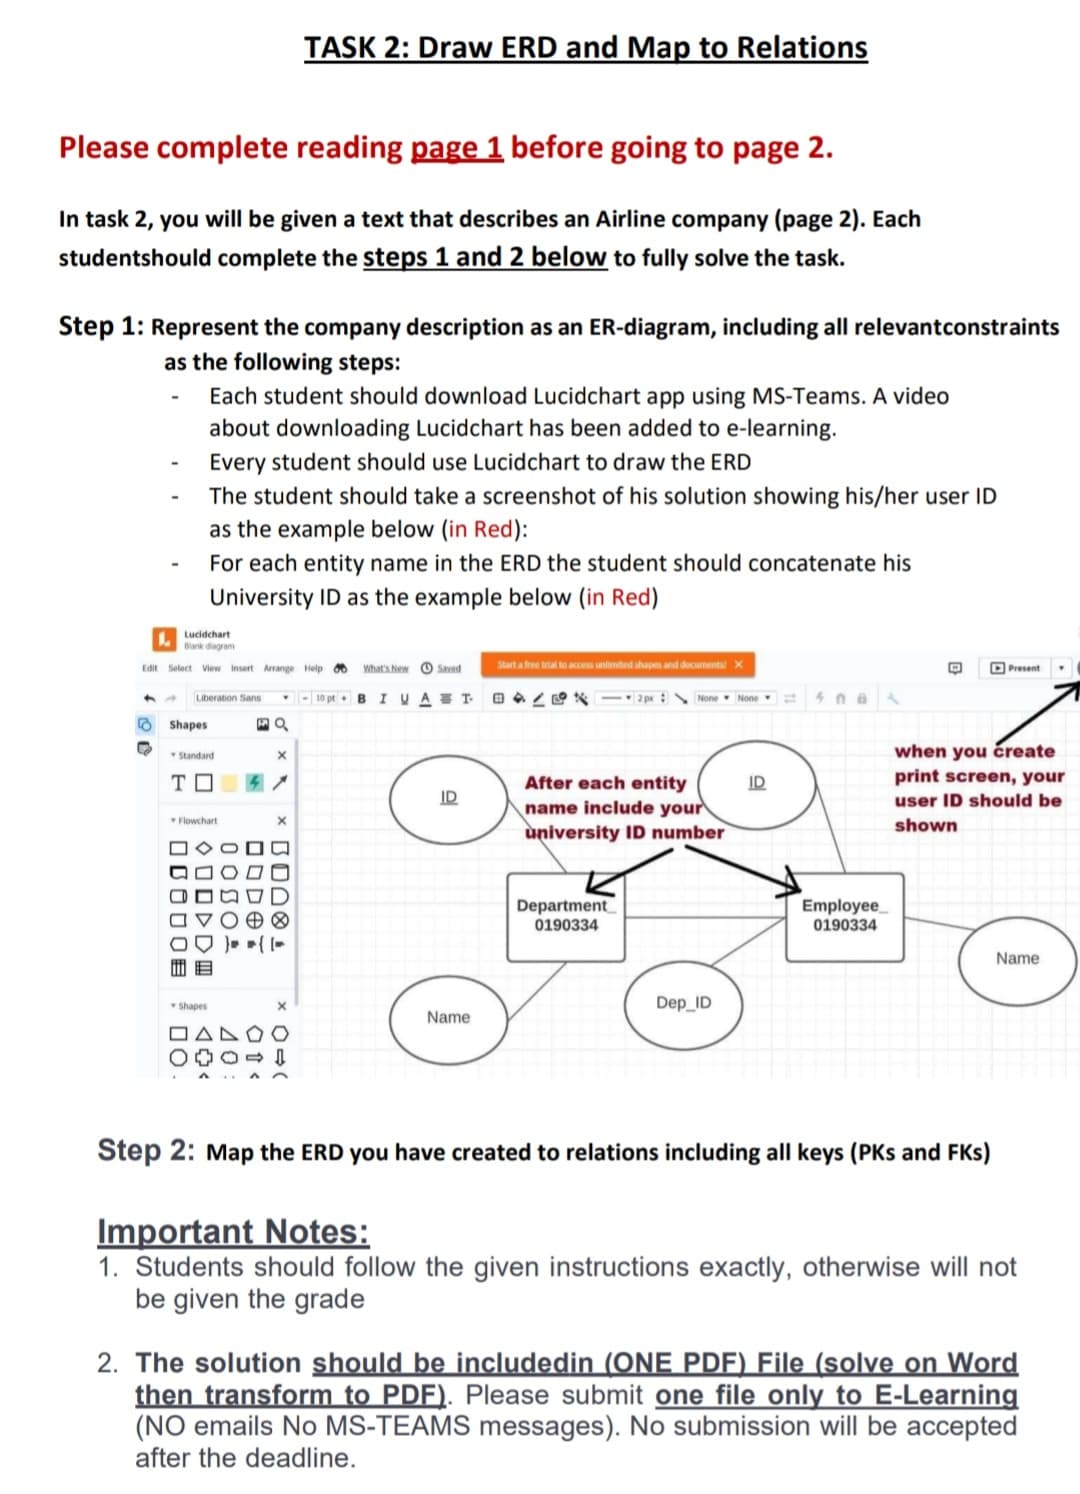 Please complete reading page 1 before going to page 2.
In task 2, you will be given a text that describes an Airline company (page 2). Each
studentshould complete the steps 1 and 2 below to fully solve the task.
Step 1: Represent the company description as an ER-diagram, including all relevantconstraints
as the following steps:
-
Lucidchart
Blank diagram
Edit Select View Insert Arrange Help
Shapes
Each student should download Lucidchart app using MS-Teams. A video
about downloading Lucidchart has been added to e-learning.
Every student should use Lucidchart draw the ERD
The student should take a screenshot of his solution showing his/her user ID
as the example below (in Red):
For each entity name in the ERD the student should concatenate his
University ID as the example below (in Red)
Standard
ΤΠ
DOO
Liberation Sans Y <-10 pt - BIVAT BAZ2px None None
MQ
Flowchart
ODDE
Shapes
00
<<
TASK 2: Draw ERD and Map to Relations
TOBOO
40
X
× BODOL
0 (
What's NewSaved
Start a free trial to access unlimited shapes and documents! X
D
ID
Name
After each entity
name include your
university ID number
Department
0190334
Dep_ID
ID
408
Employee
0190334
Present
when you create
print screen, your
user ID should be
shown
Step 2: Map the ERD you have created to relations including all keys (PKs and FKs)
Name
Important Notes:
1. Students should follow the given instructions exactly, otherwise will not
be given the grade
2. The solution should be includedin (ONE PDF) File (solve on Word
then transform to PDF). Please submit one file only to E-Learning
(NO emails No MS-TEAMS messages). No submission will be accepted
after the deadline.